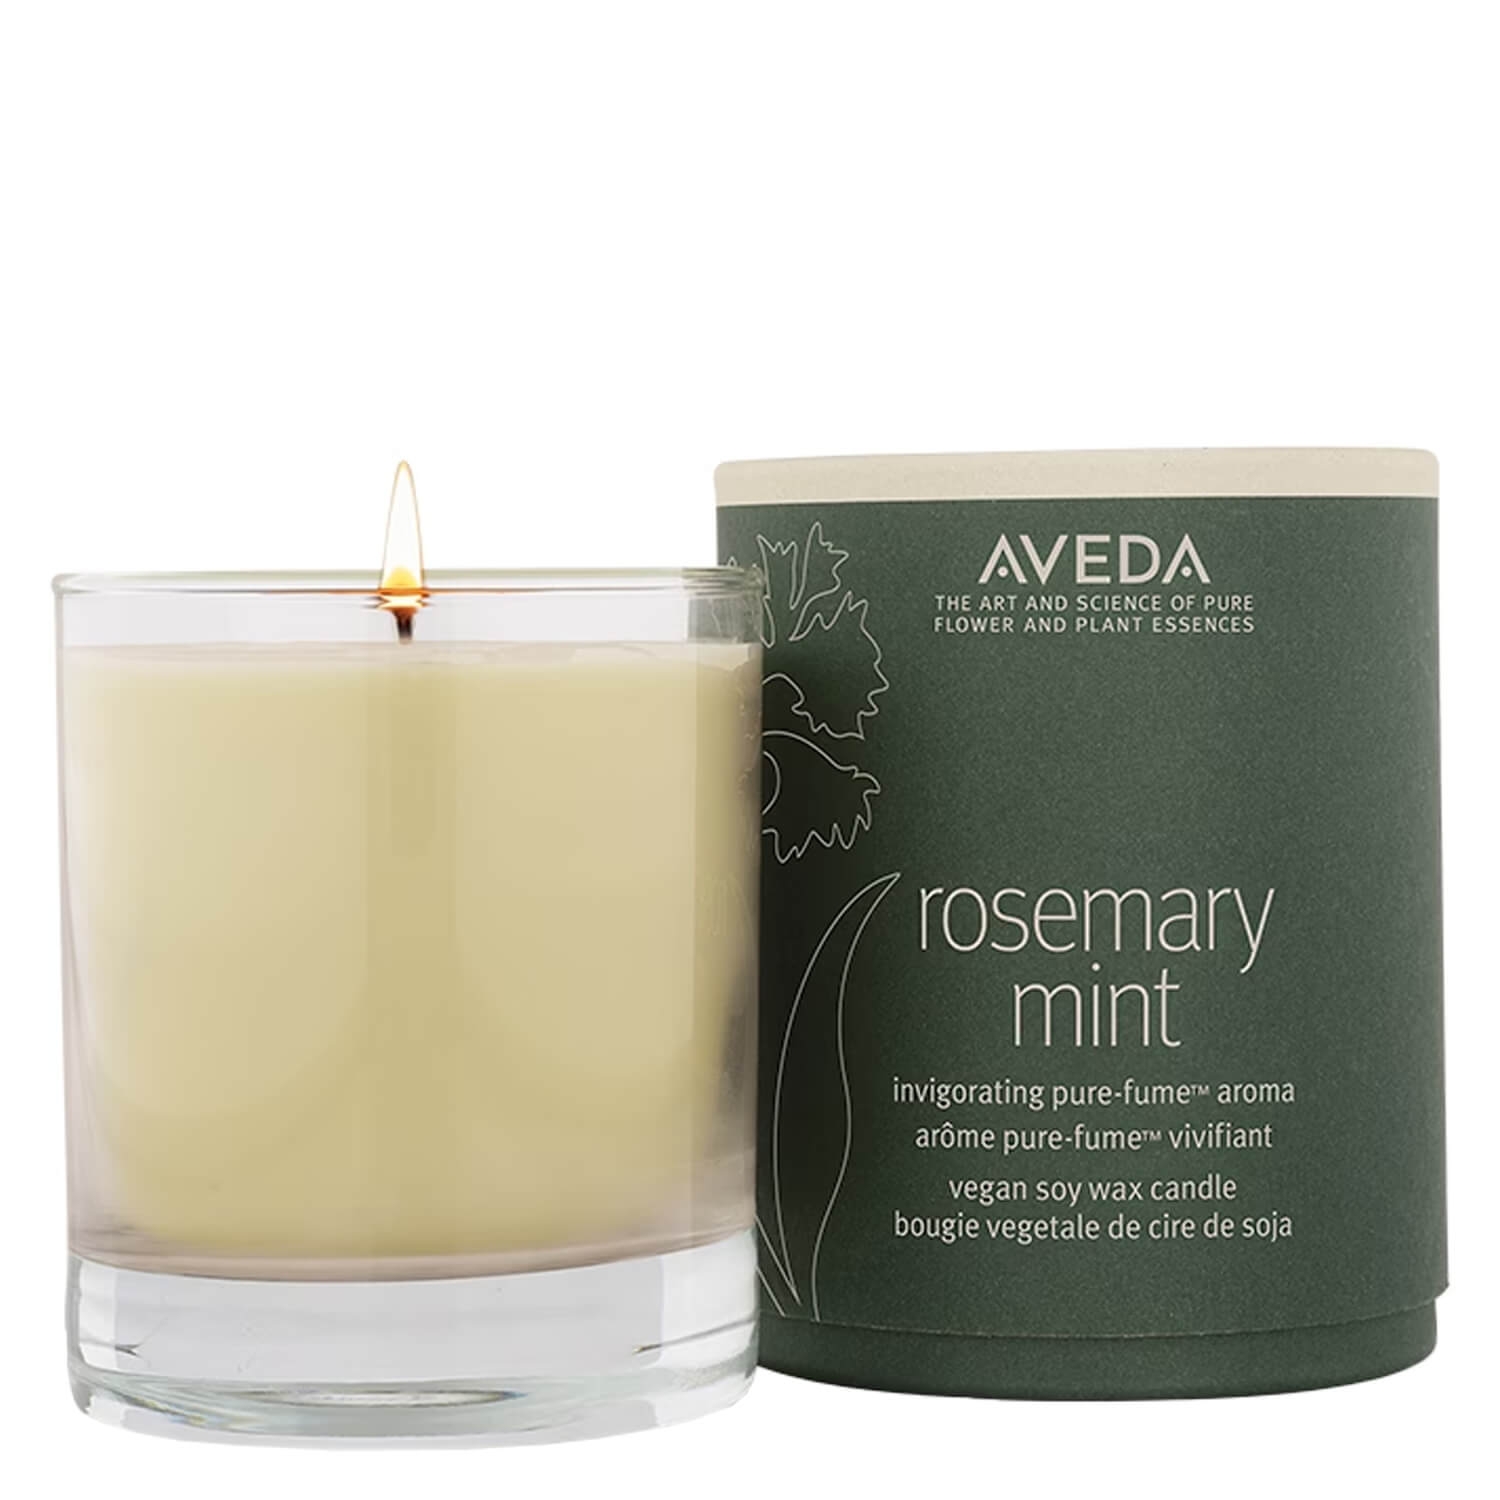 Product image from rosemary mint - Vegan Soy Wax Candle